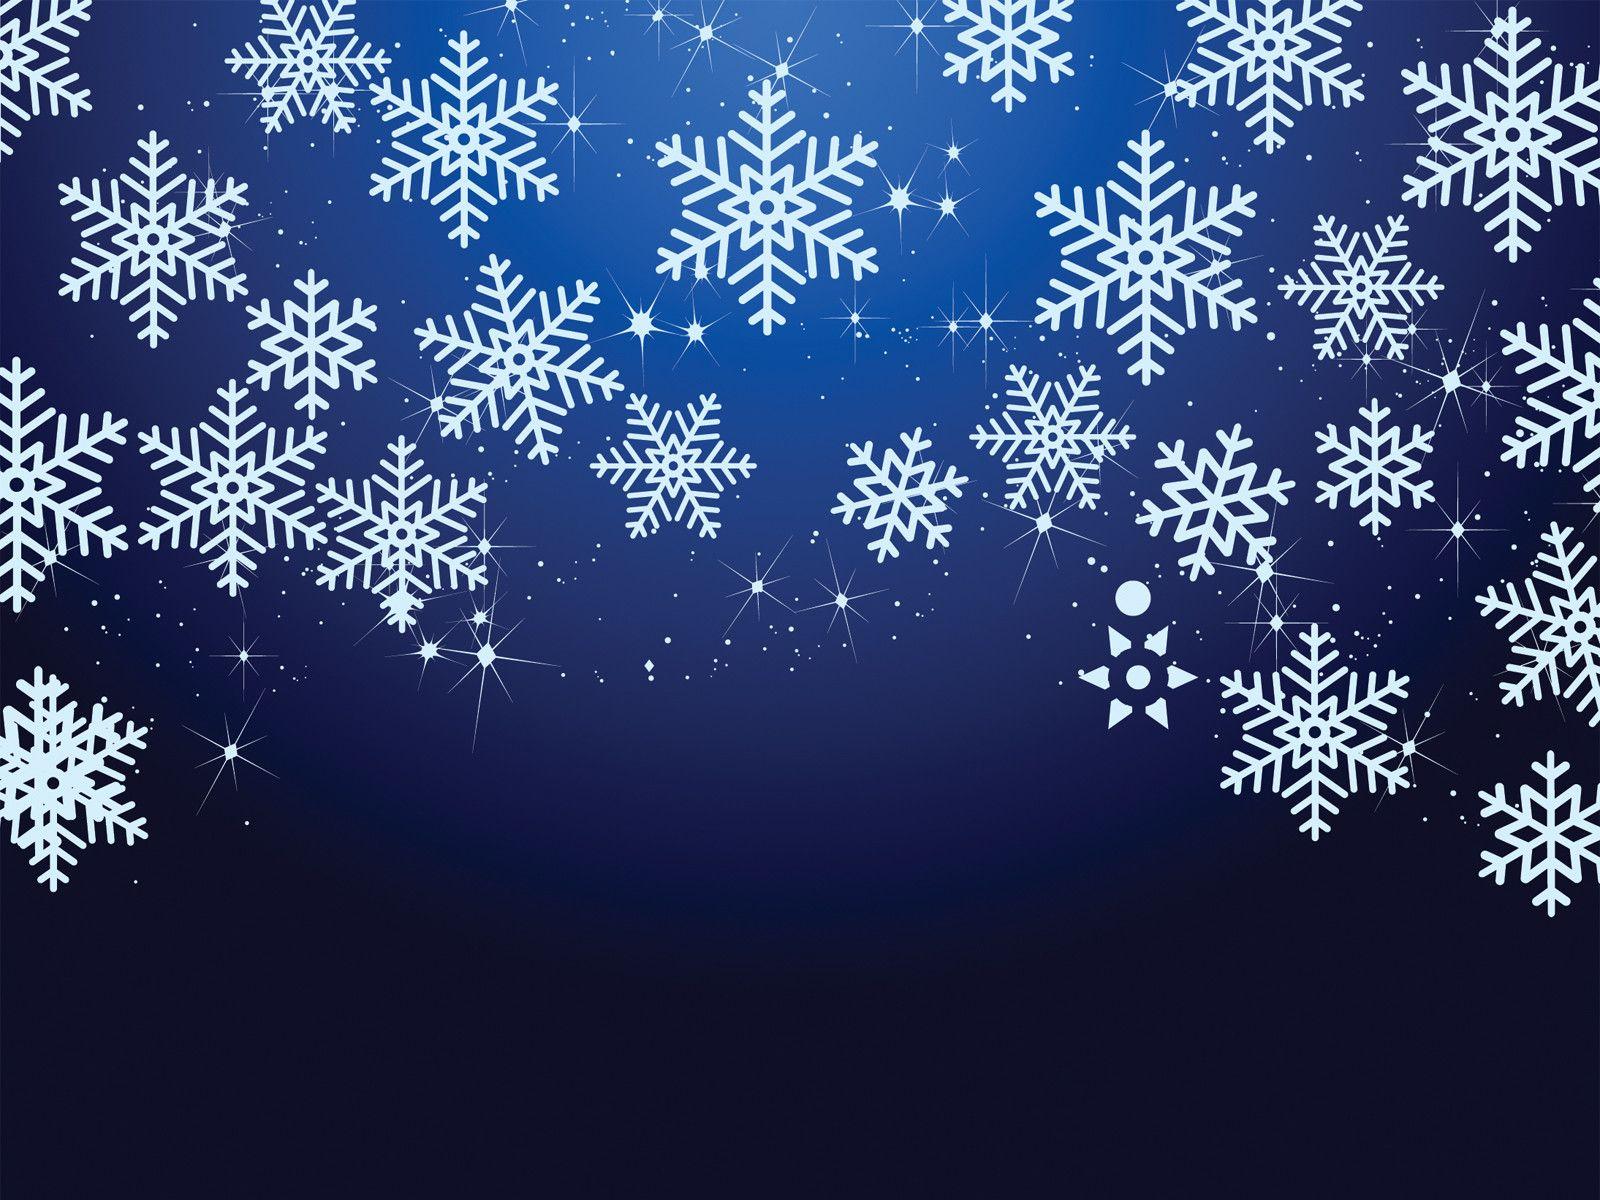 Xmas Backgrounds - Wallpaper Cave Animated Christmas Powerpoint Backgrounds